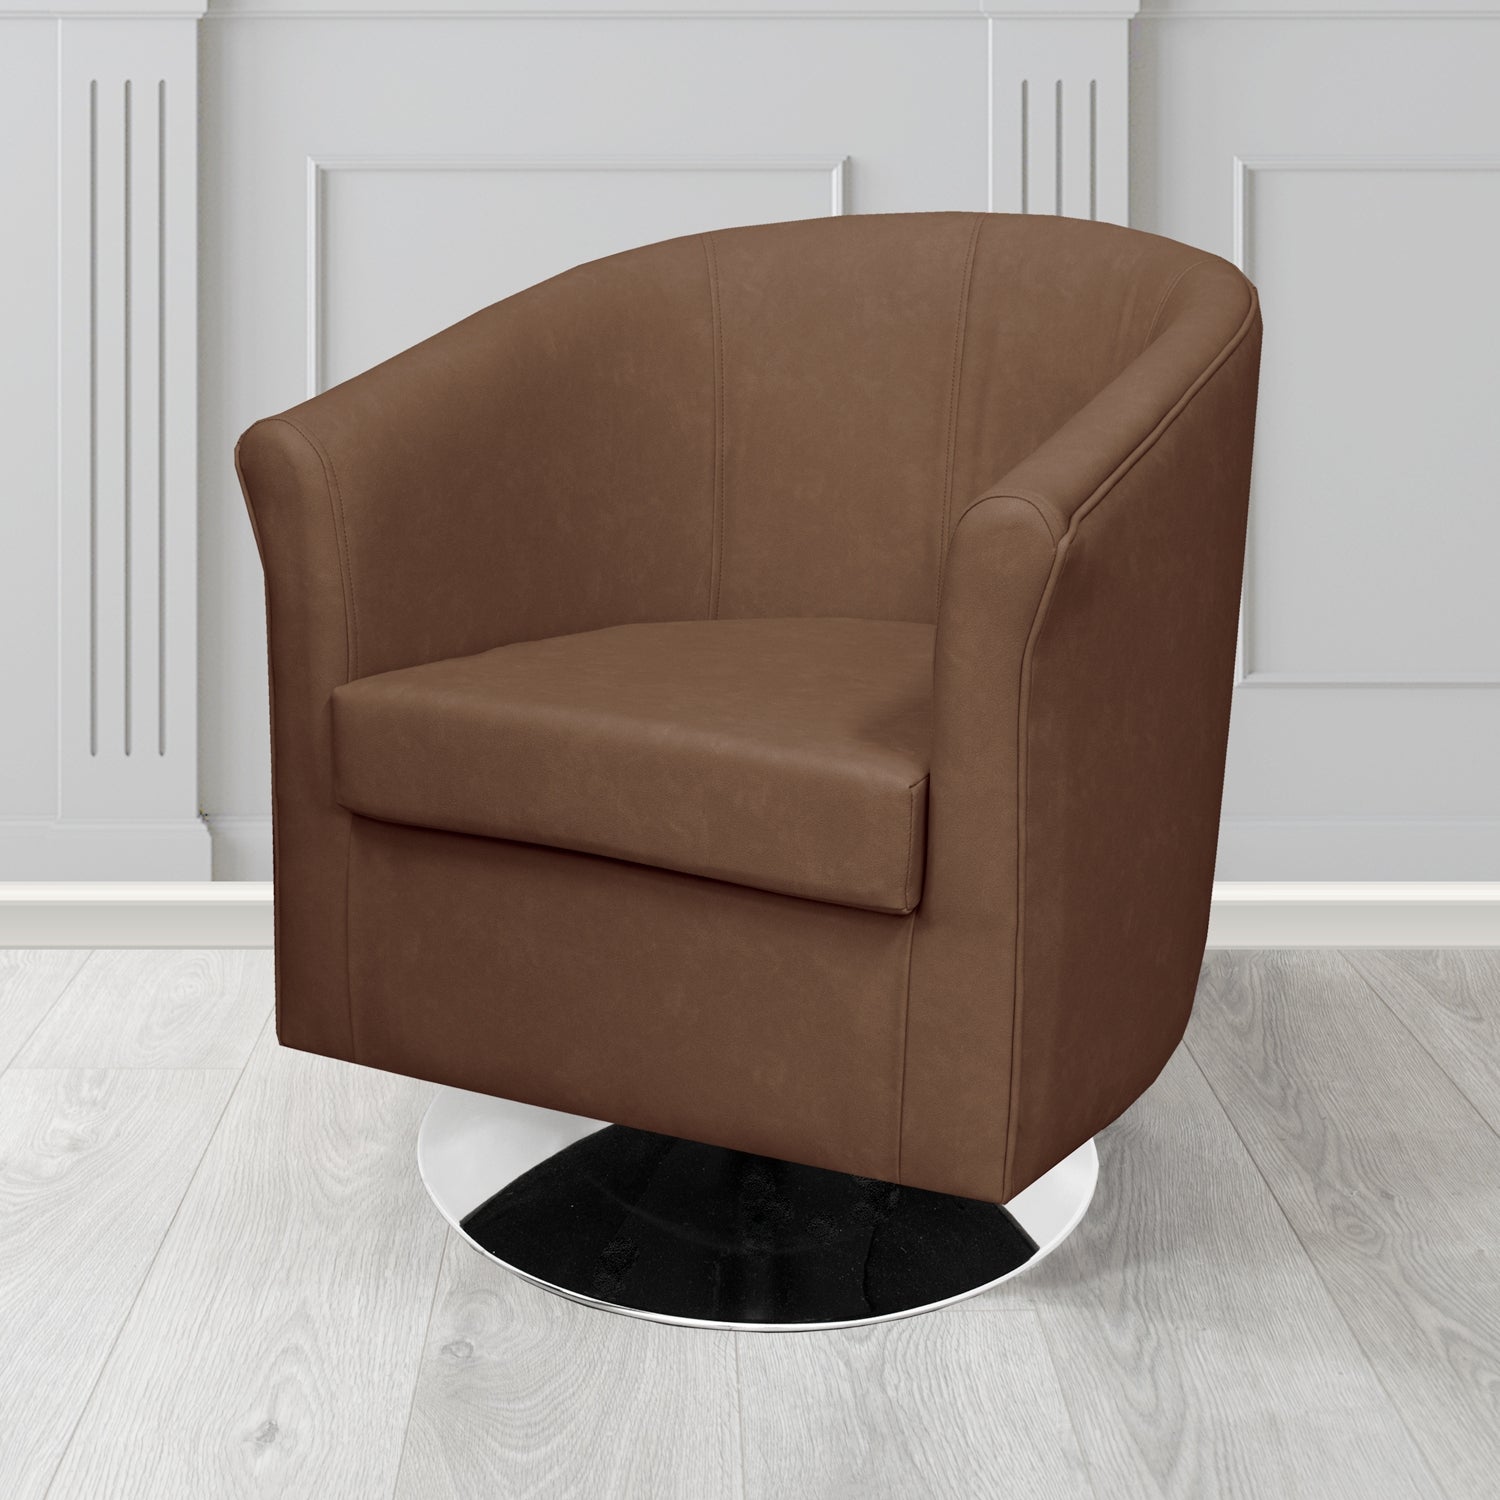 Tuscany Swivel Tub Chair in Infiniti Tan INF1850 Antimicrobial Crib 5 Faux Leather - The Tub Chair Shop